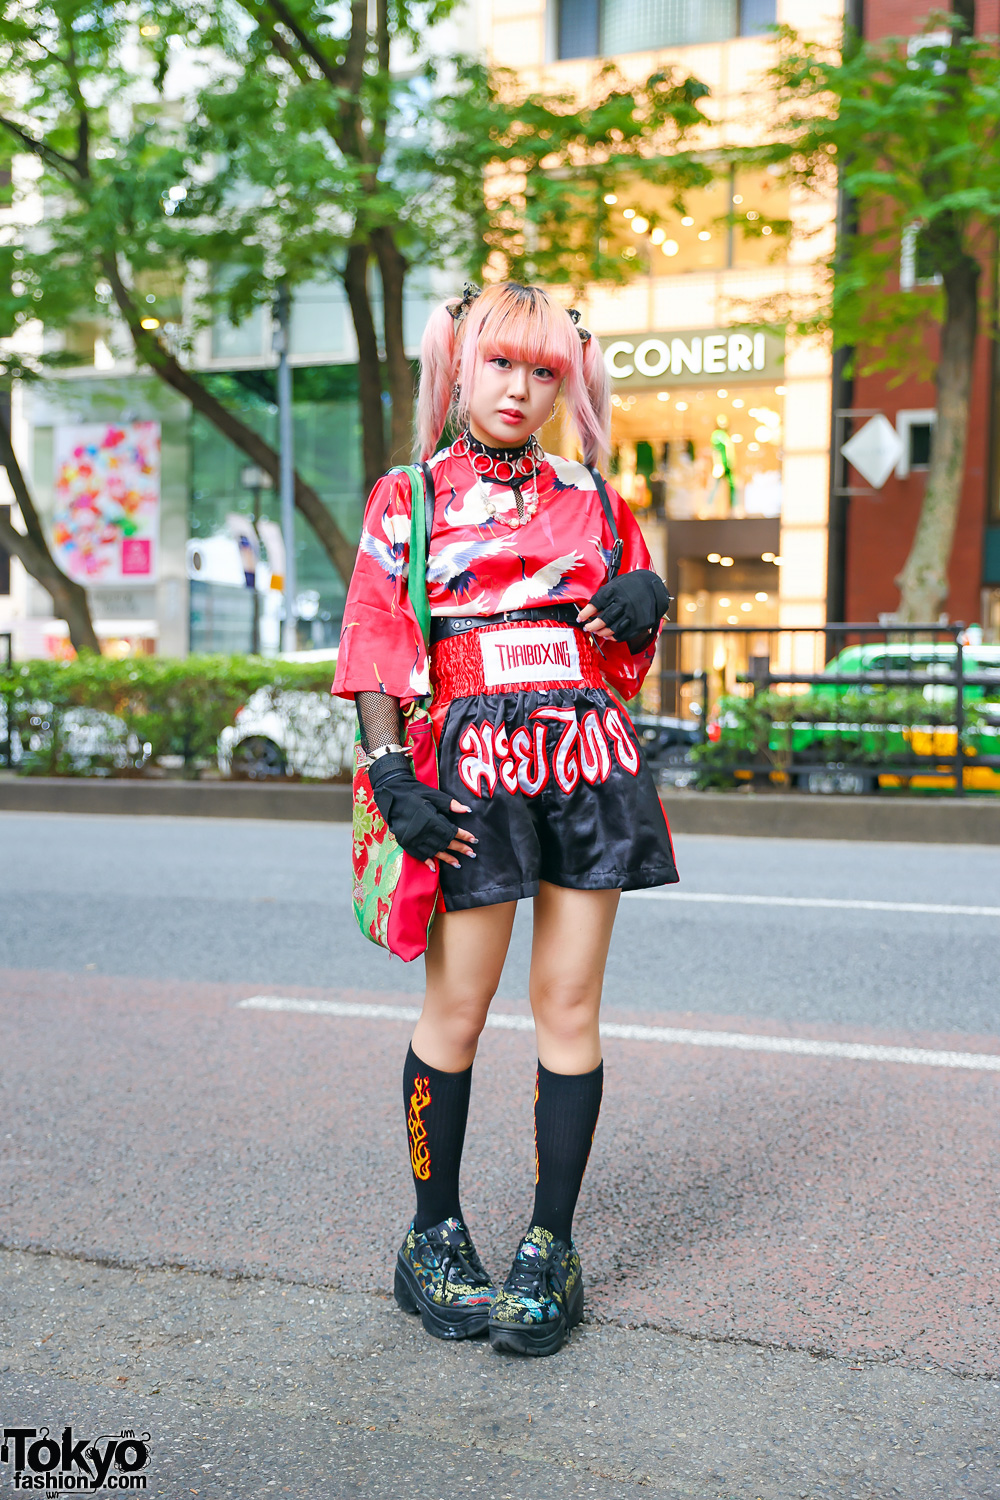 Thai Boxing Shorts Tokyo Street Style w/ Pink Twin Tails, Village Vanguard Japanese Cranes Tunic Top, Handmade Tote, Spinns, Oh Pearl & WC Dragon Shoes